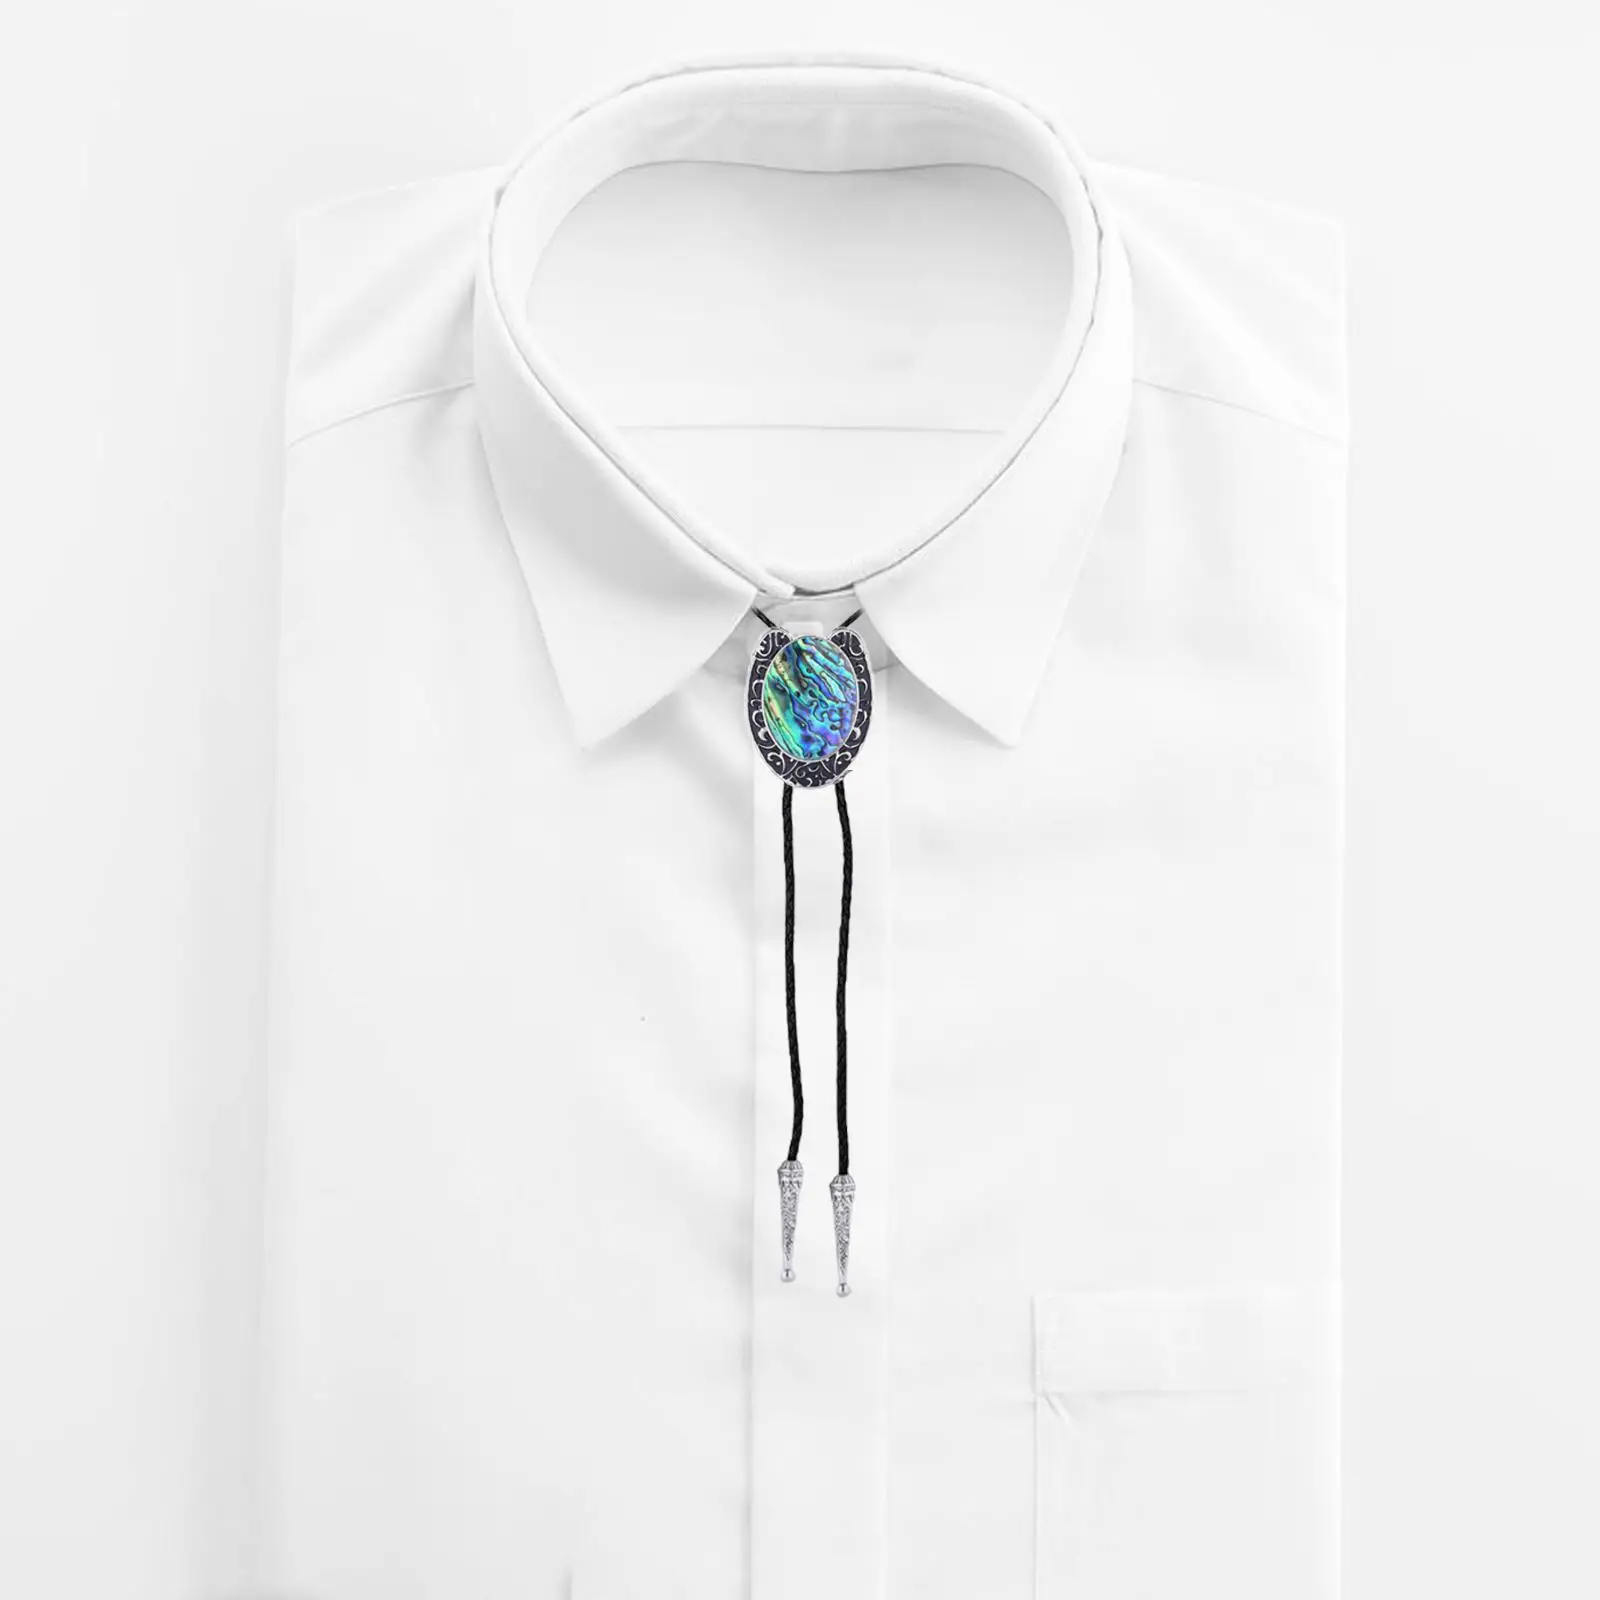 Western Bolo Tie Shirt Neck Ties Western Necklace Tie Costume Accessory with Pendant for Men Women Teens Adults Birthday Gift